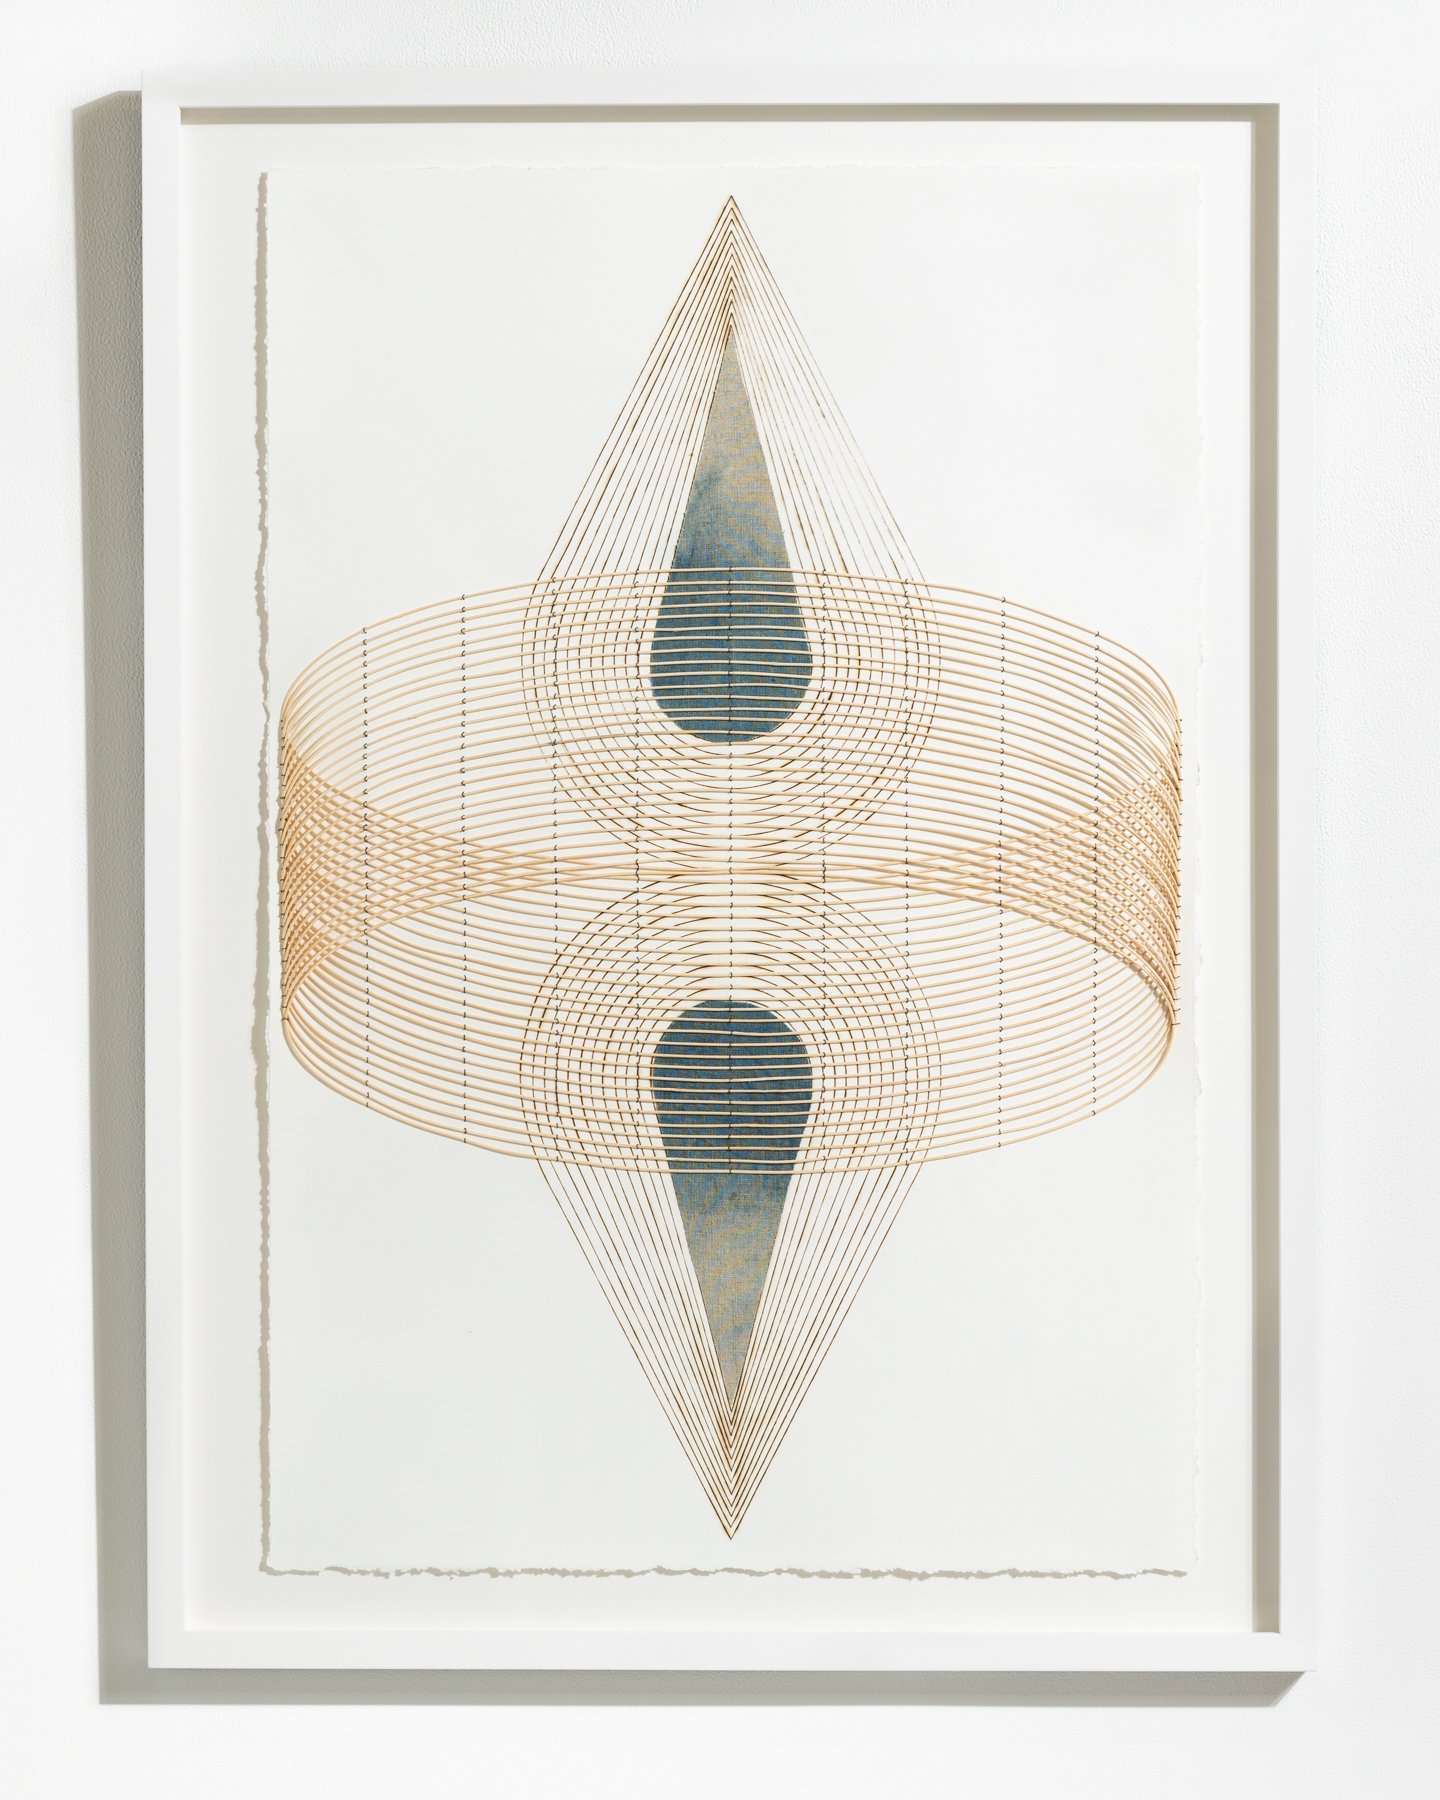 "Balanced Drops" Geometric Art with Burned Lines and Dyed Reeds on Paper by Katrine Hildebrandt-Hussey @ Soapbox Arts Gallery, Burlington, VT 